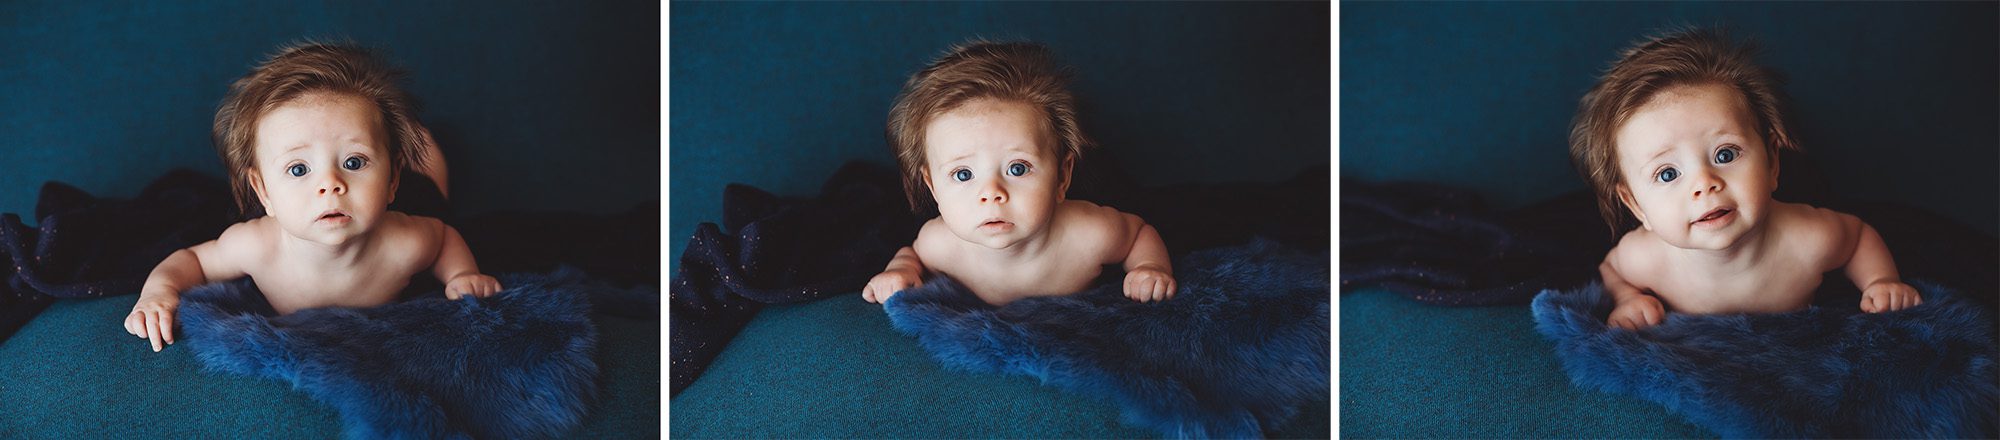 Carter's eyes are brilliant blue with this gorgeous rich, blue backdrop